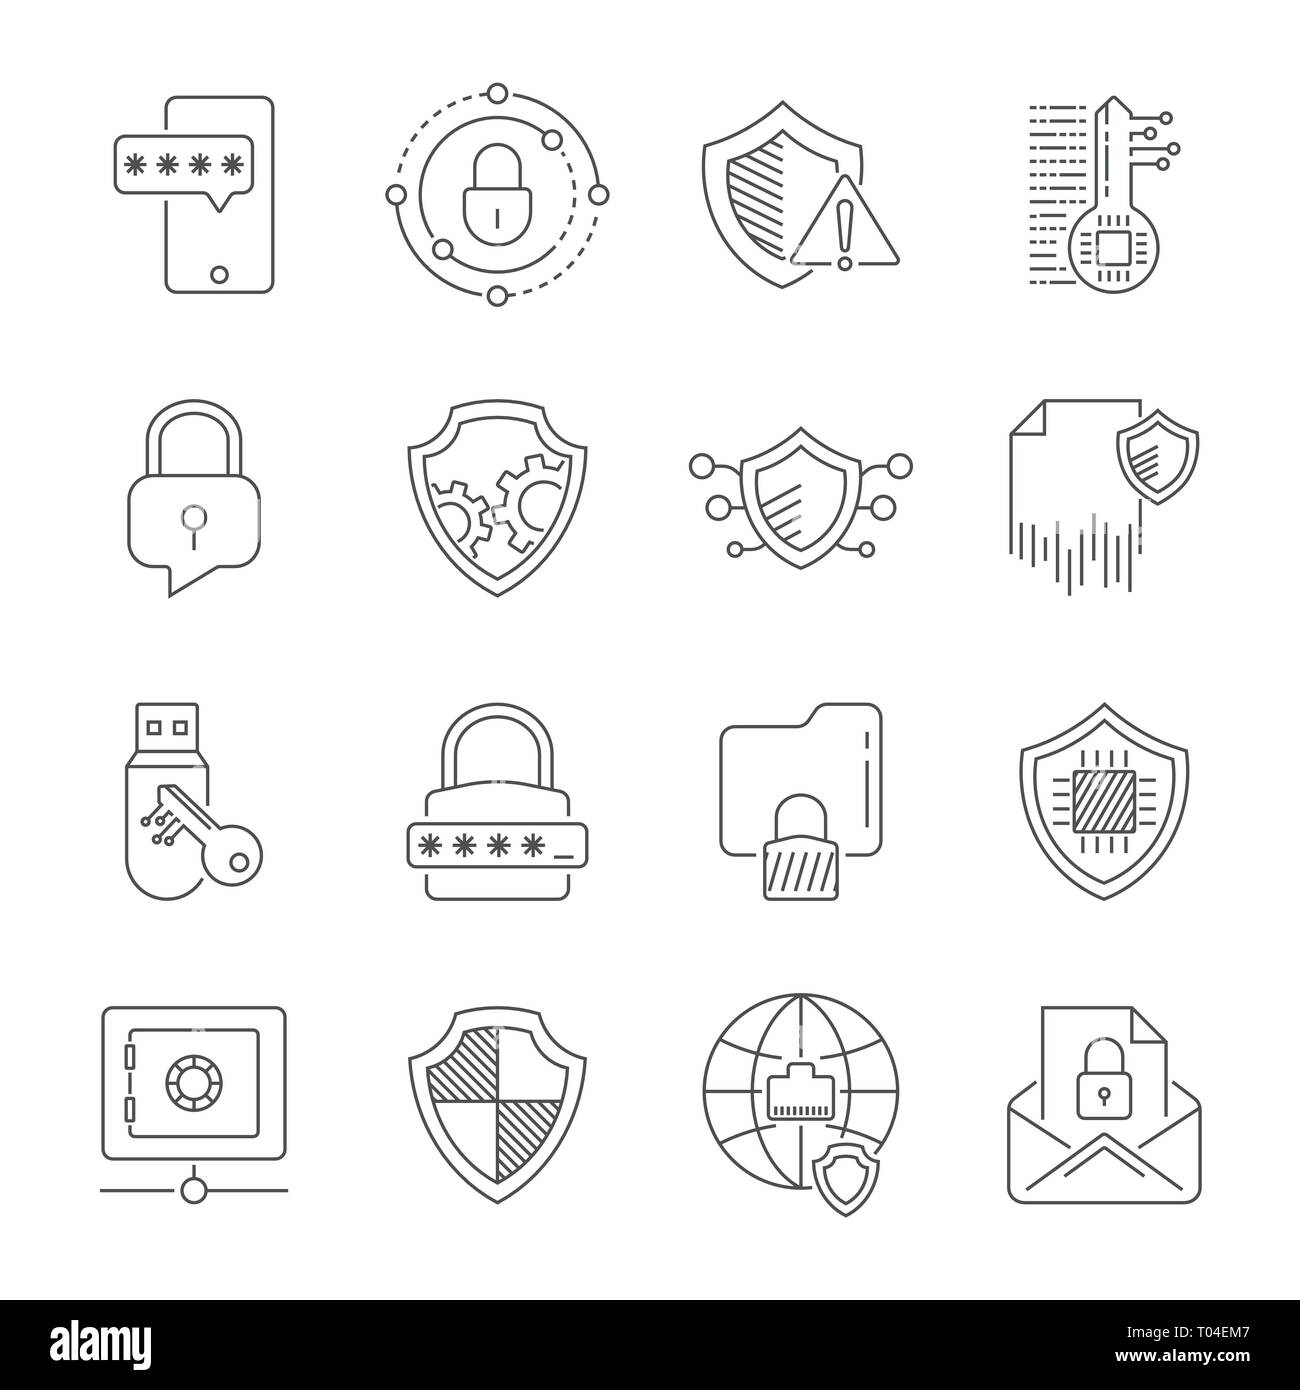 Data Privacy icons set. Included the icons as security information, data protection, shield, compliant, personal data, database and more. Illustration Stock Vector